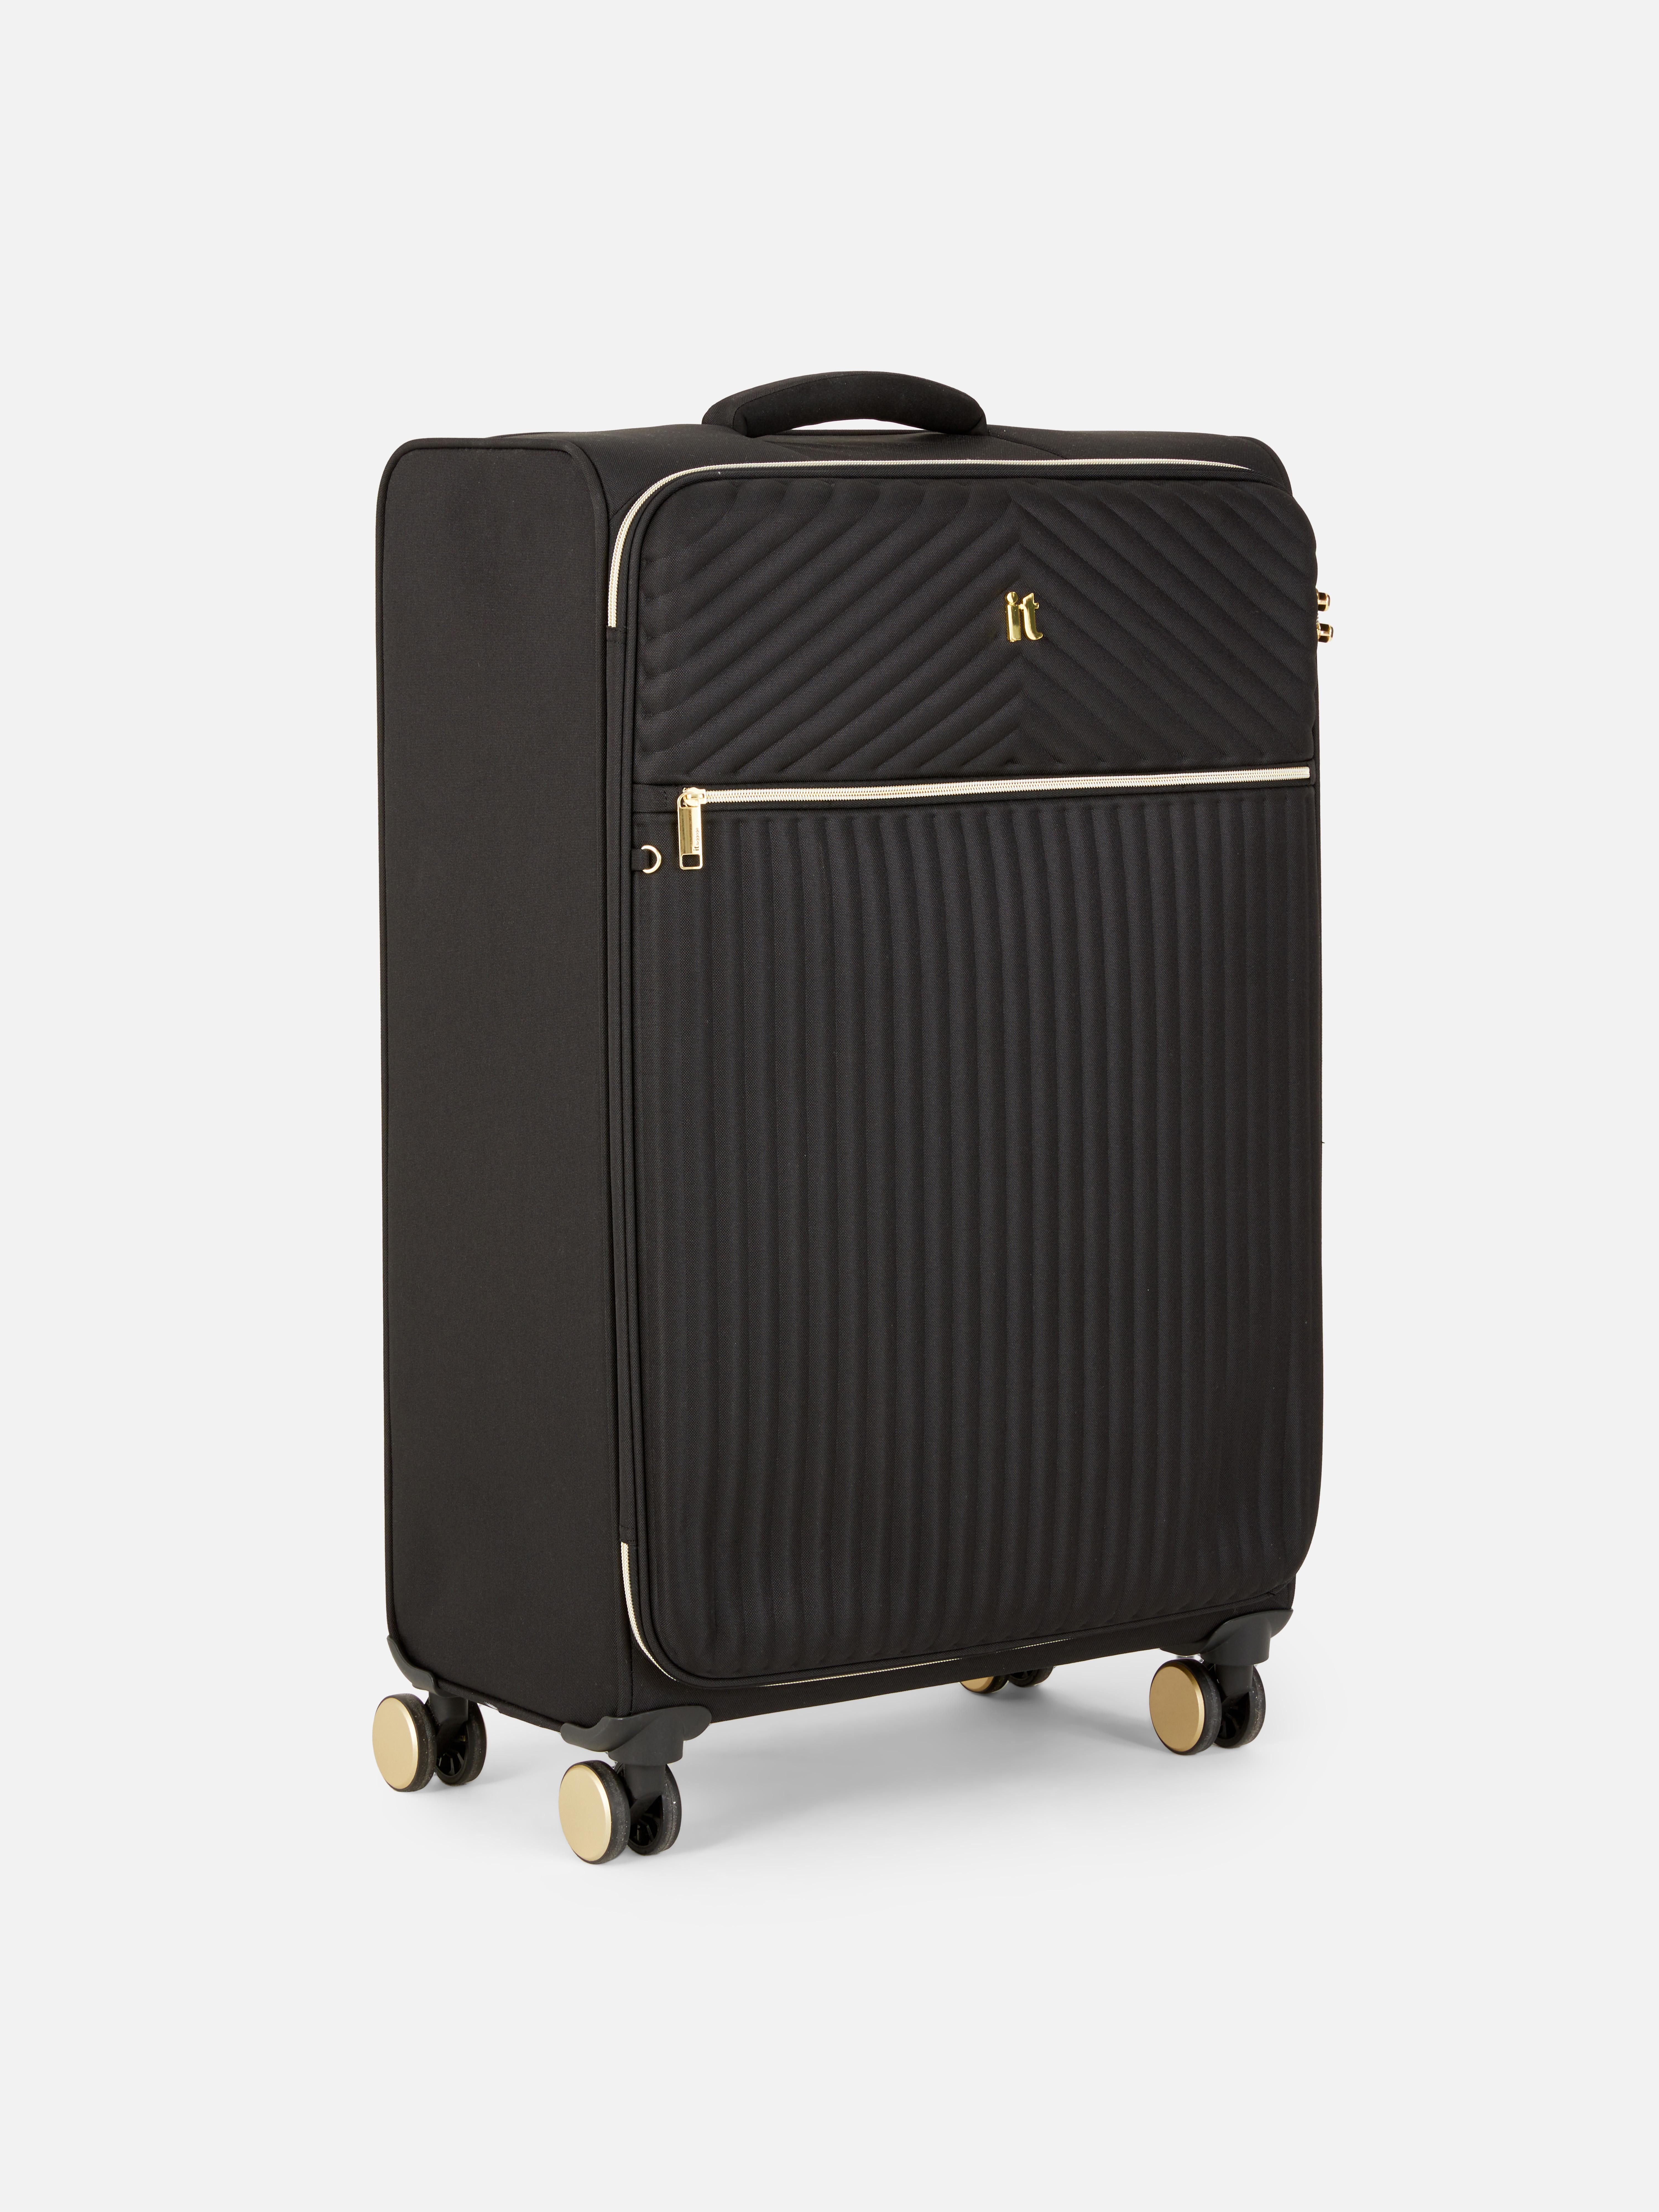 Black it Luggage Soft Shell Quilted Suitcase | Primark